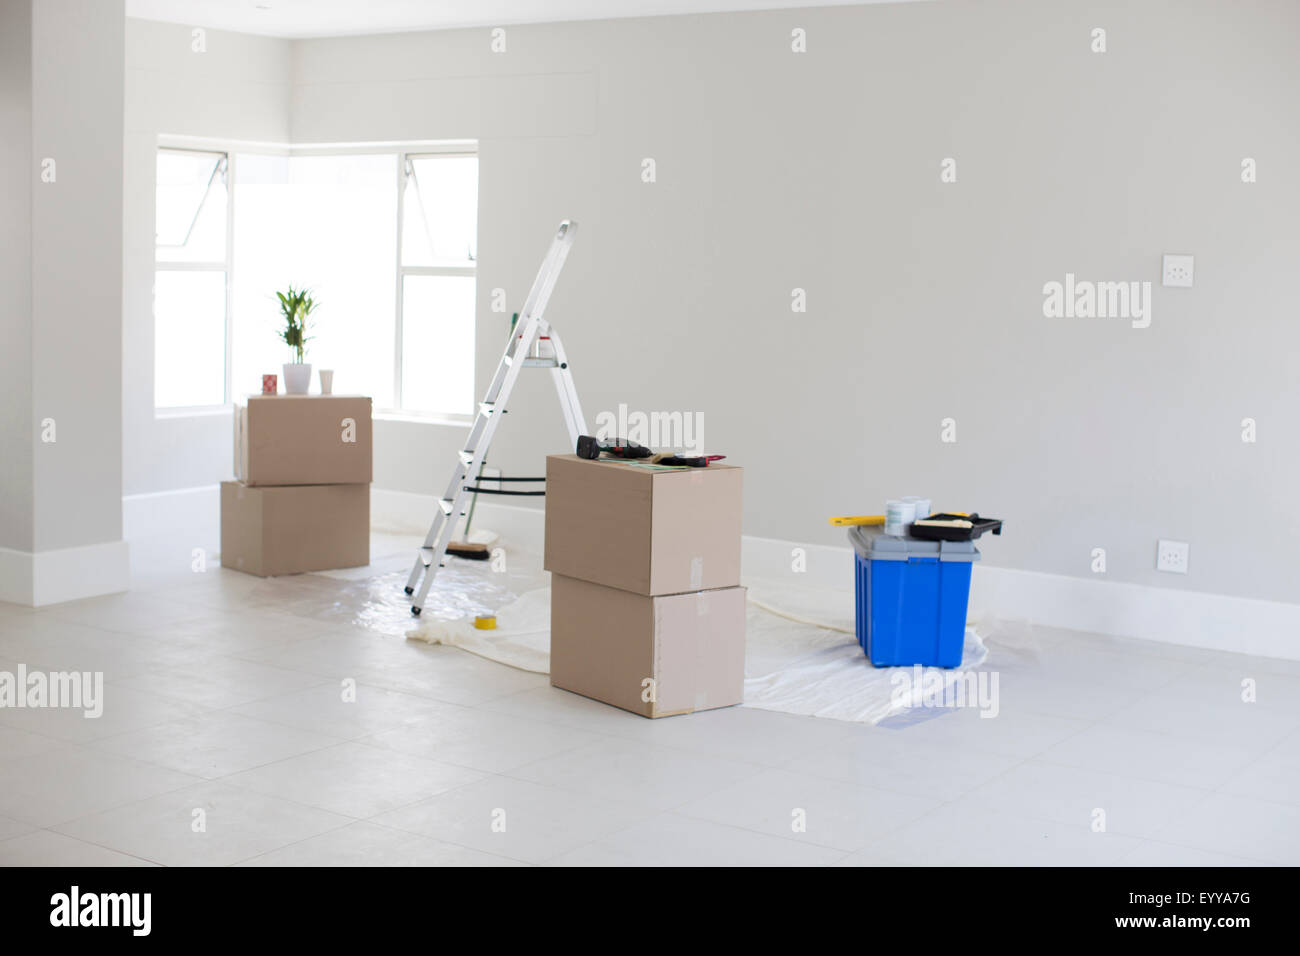 Cardboard boxes and ladder in new home Stock Photo